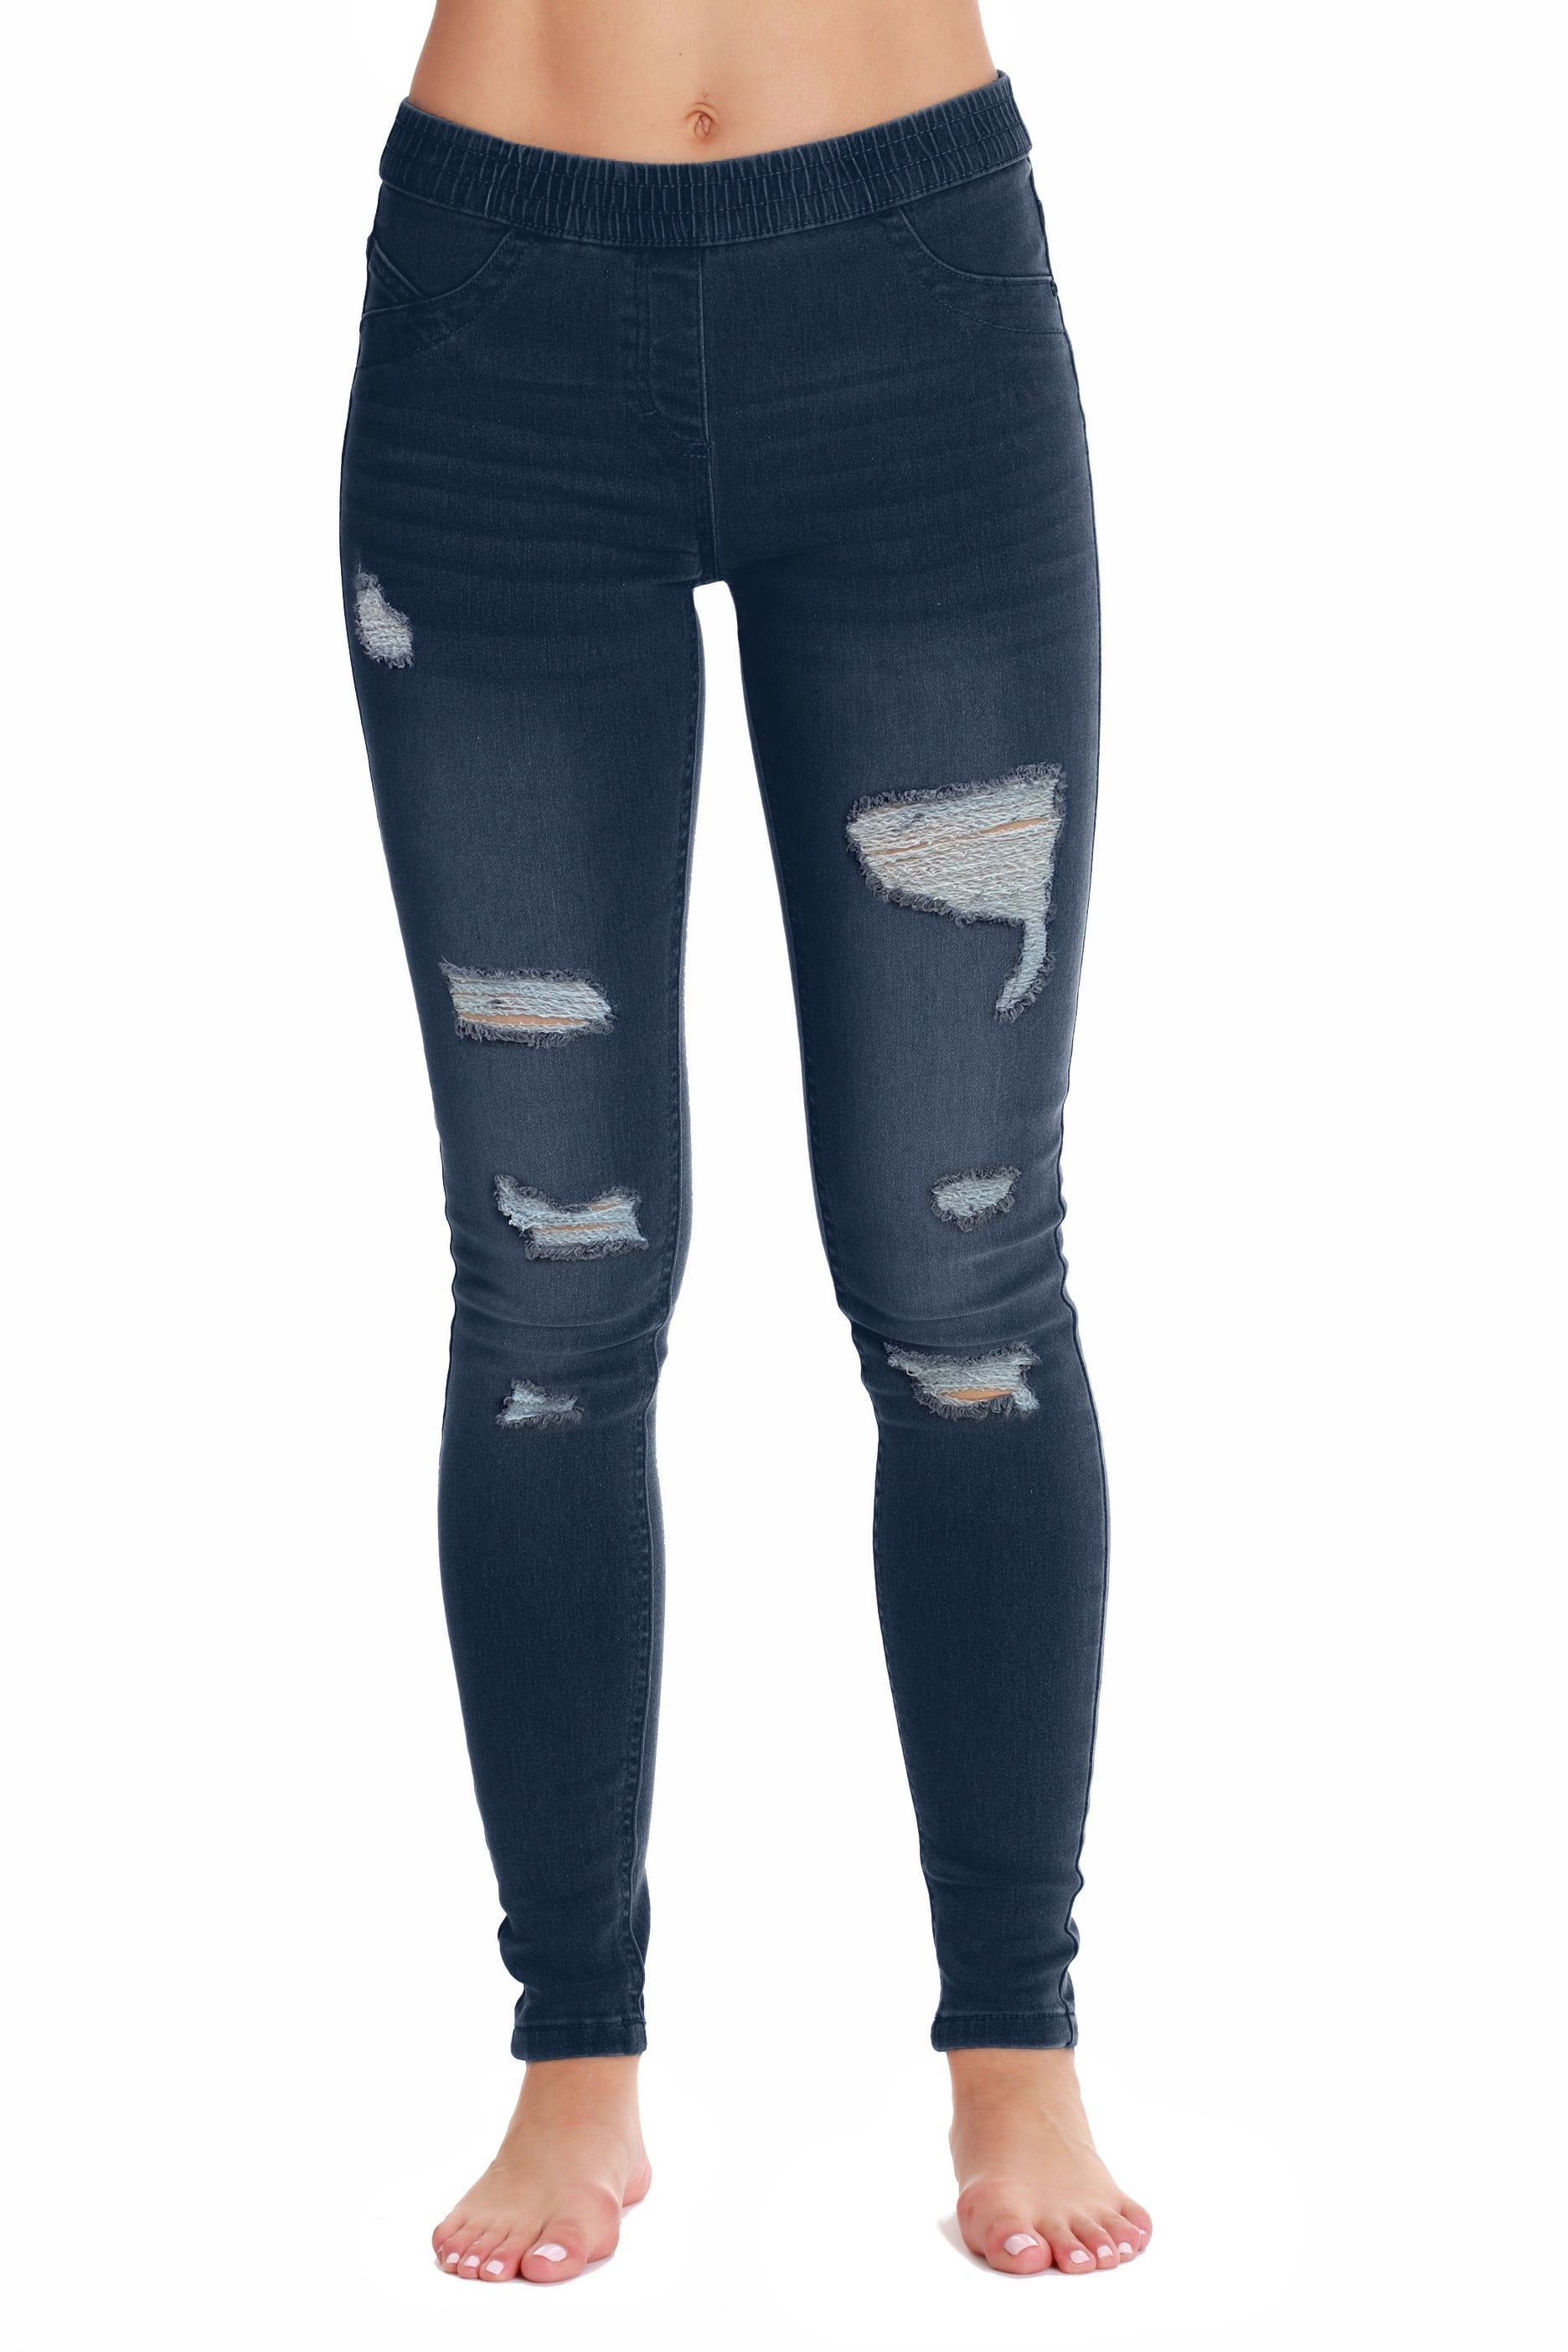 ripped jeggings womens